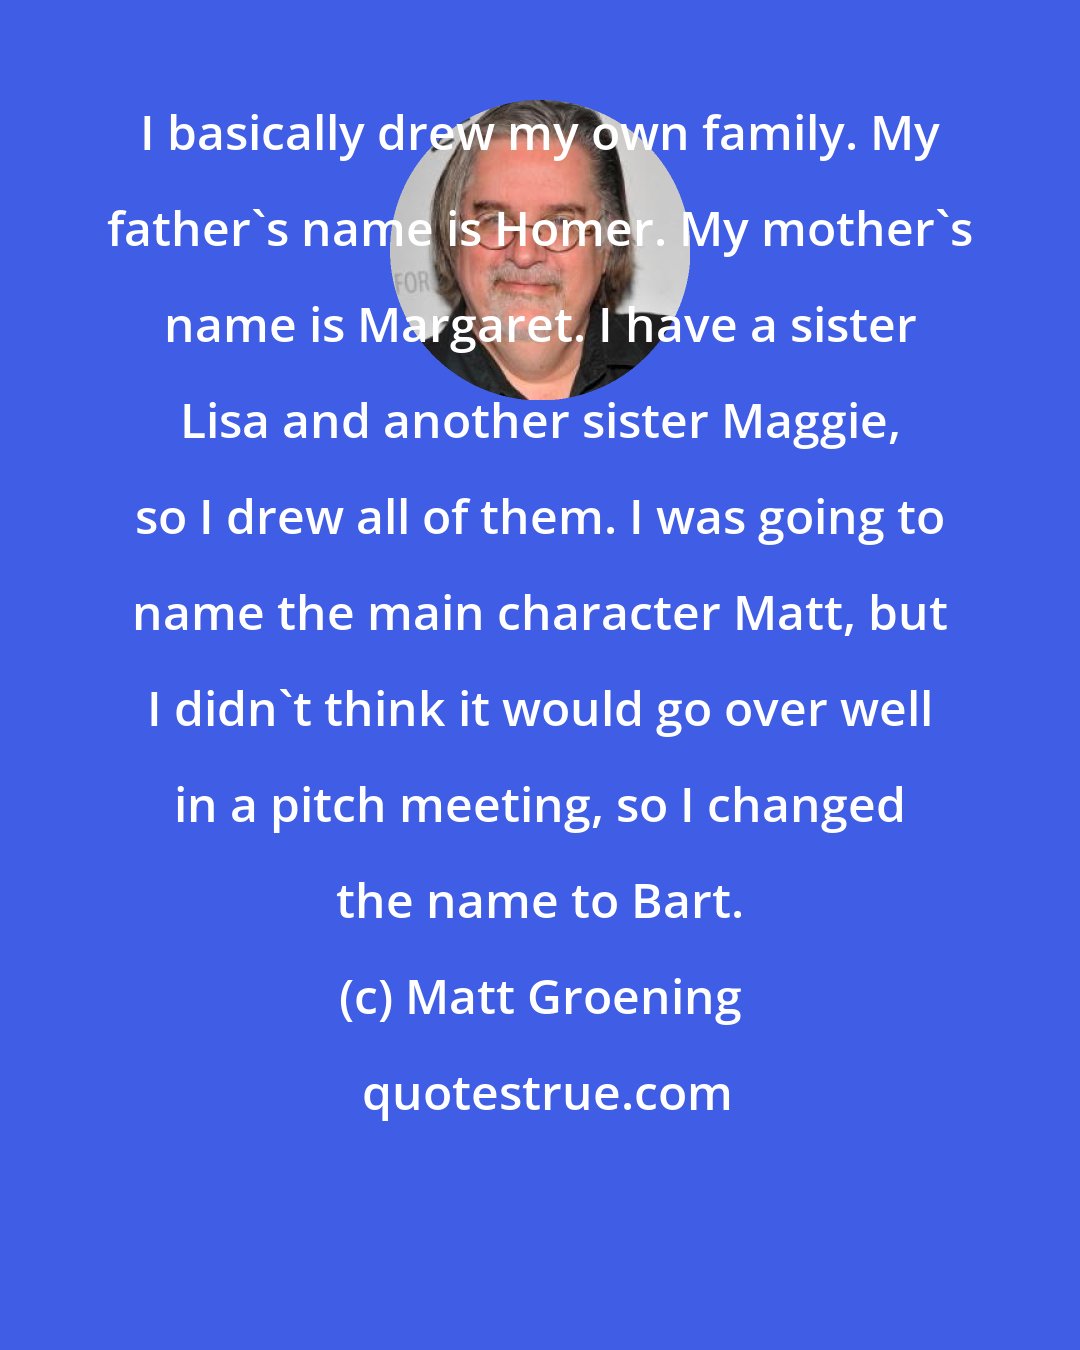 Matt Groening: I basically drew my own family. My father's name is Homer. My mother's name is Margaret. I have a sister Lisa and another sister Maggie, so I drew all of them. I was going to name the main character Matt, but I didn't think it would go over well in a pitch meeting, so I changed the name to Bart.